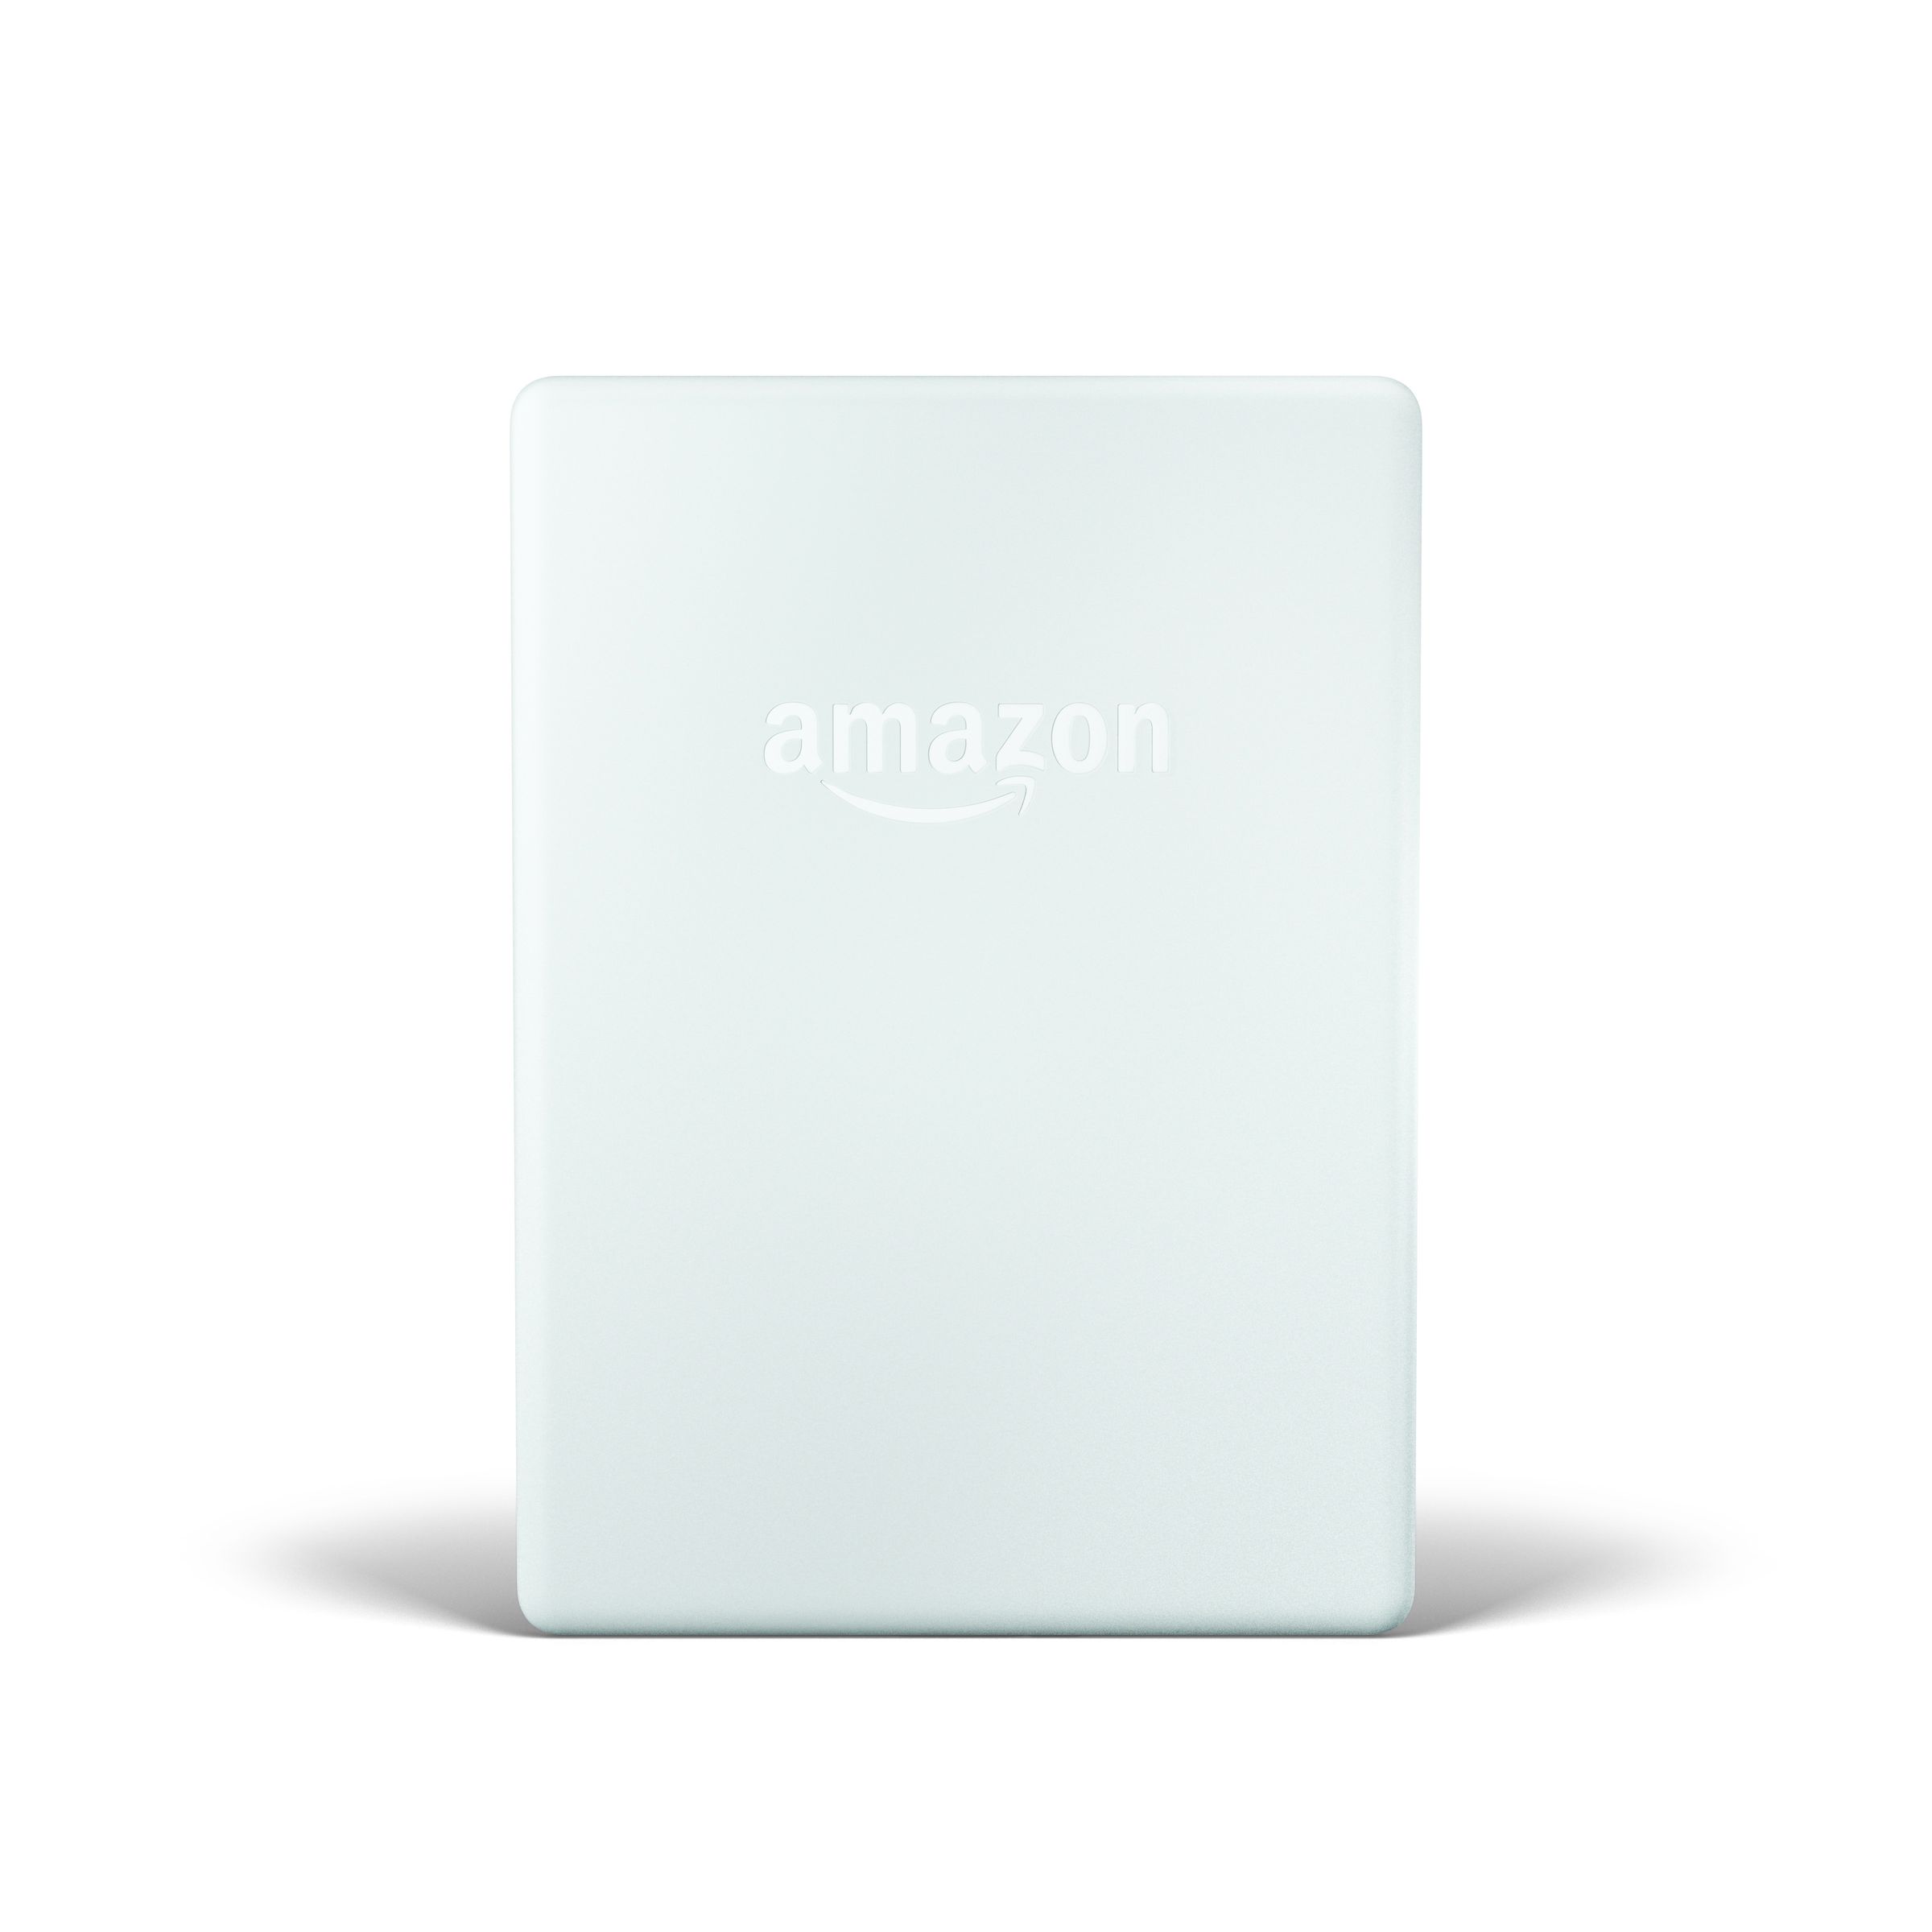 Amazon's new $79.99 Kindle comes in white